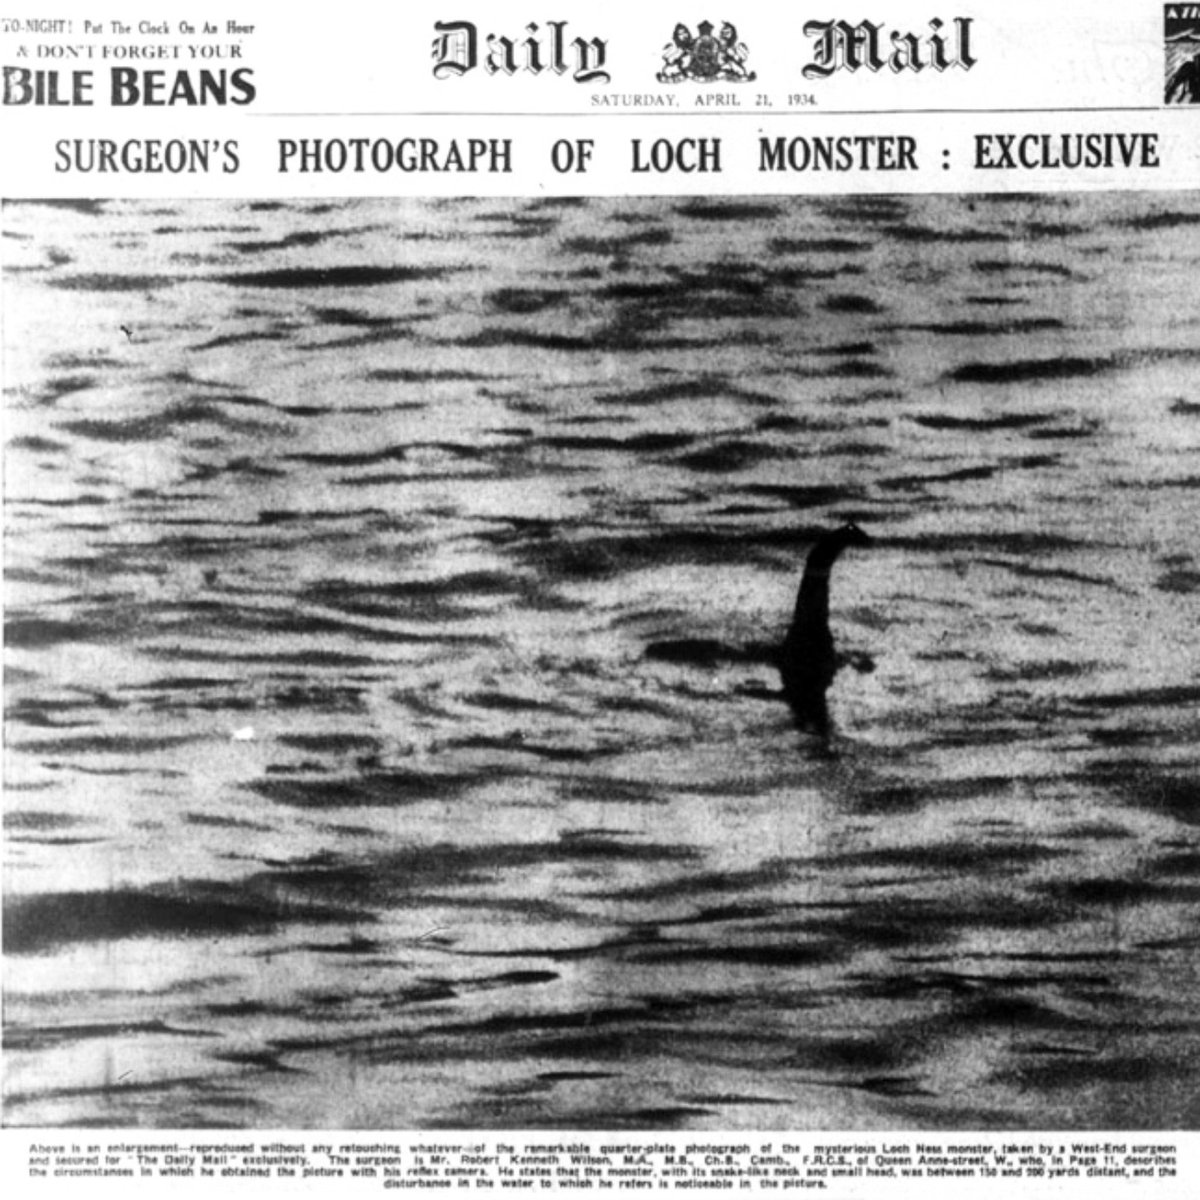 90 years ago today, Marmaduke Wetherell duped the Daily Mail into publishing a photo of a fake Loch Ness monster made by his stepson Christopher Spurling who finally came clean in 1994. Hoping @joelycett can erect statues of Spurling and Whetherell next to H from Steps